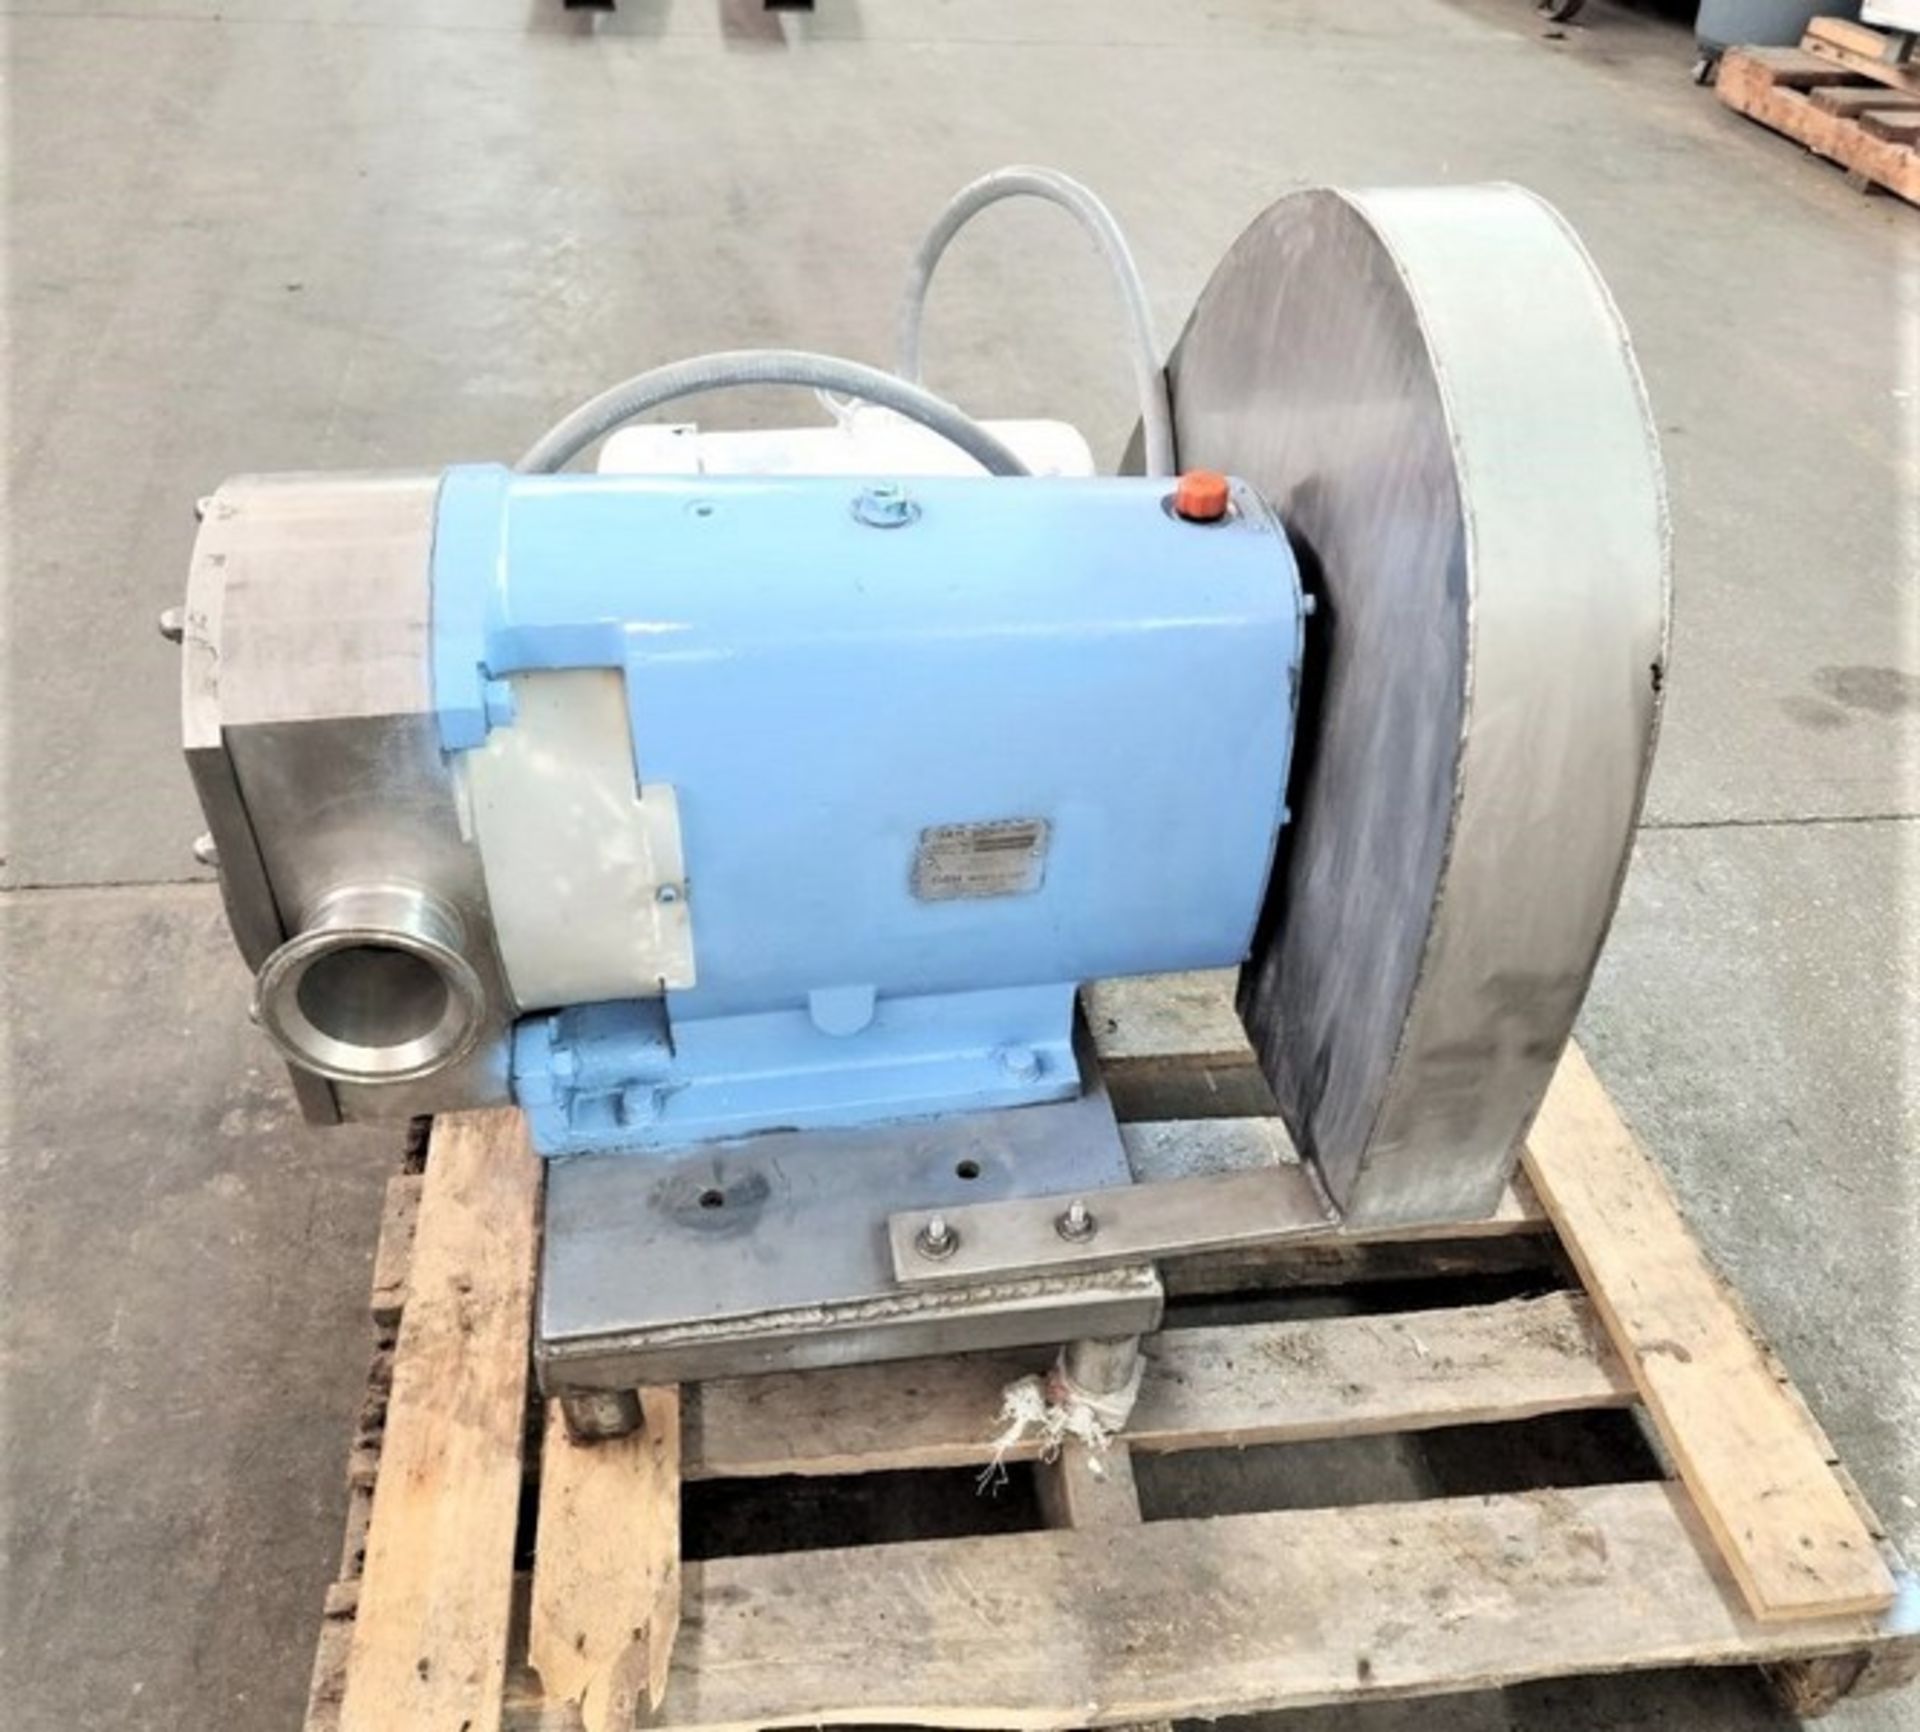 G H (Alfa Laval) 7.5 hp 4" S/S Sanitary Positive Displacement Pump, Model 822, S/N 95-8-50174 with - Image 3 of 15